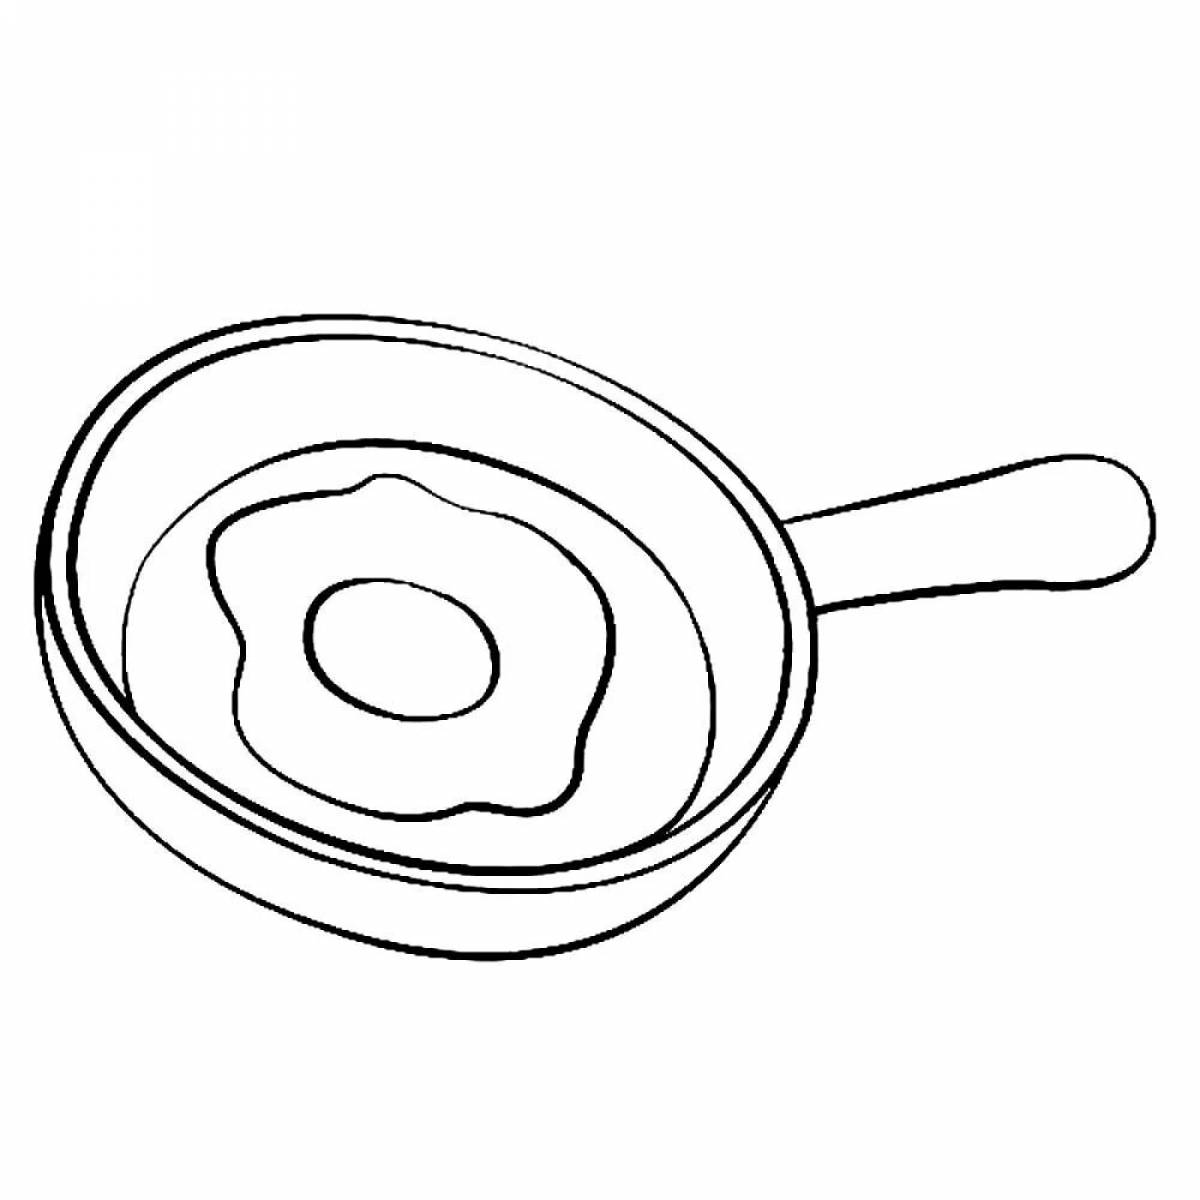 Bright omelette coloring page